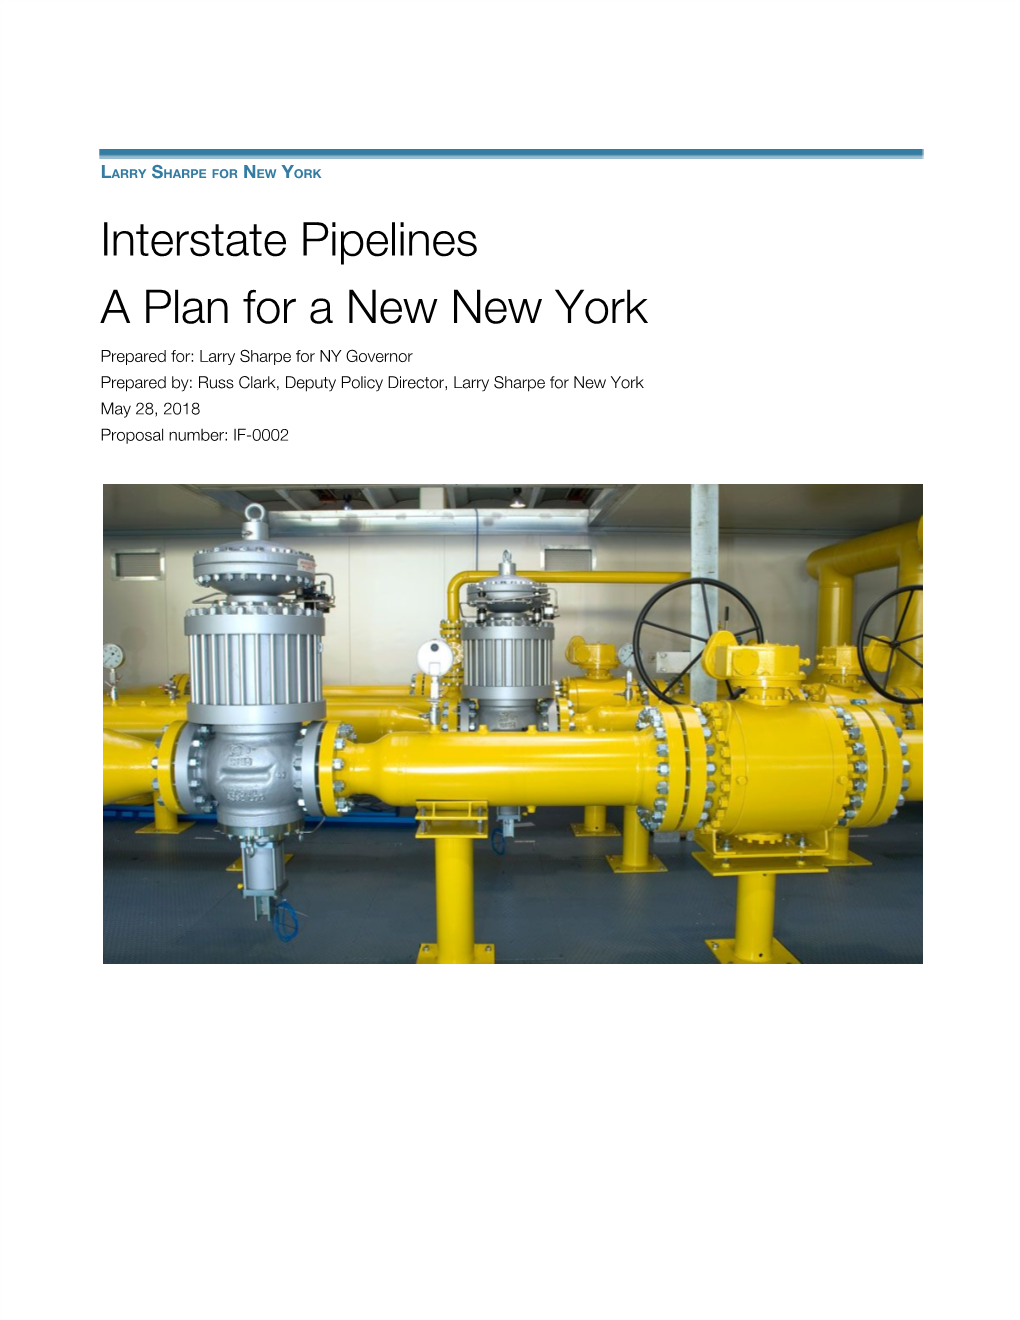 Interstate Pipelines a Plan for a New New York